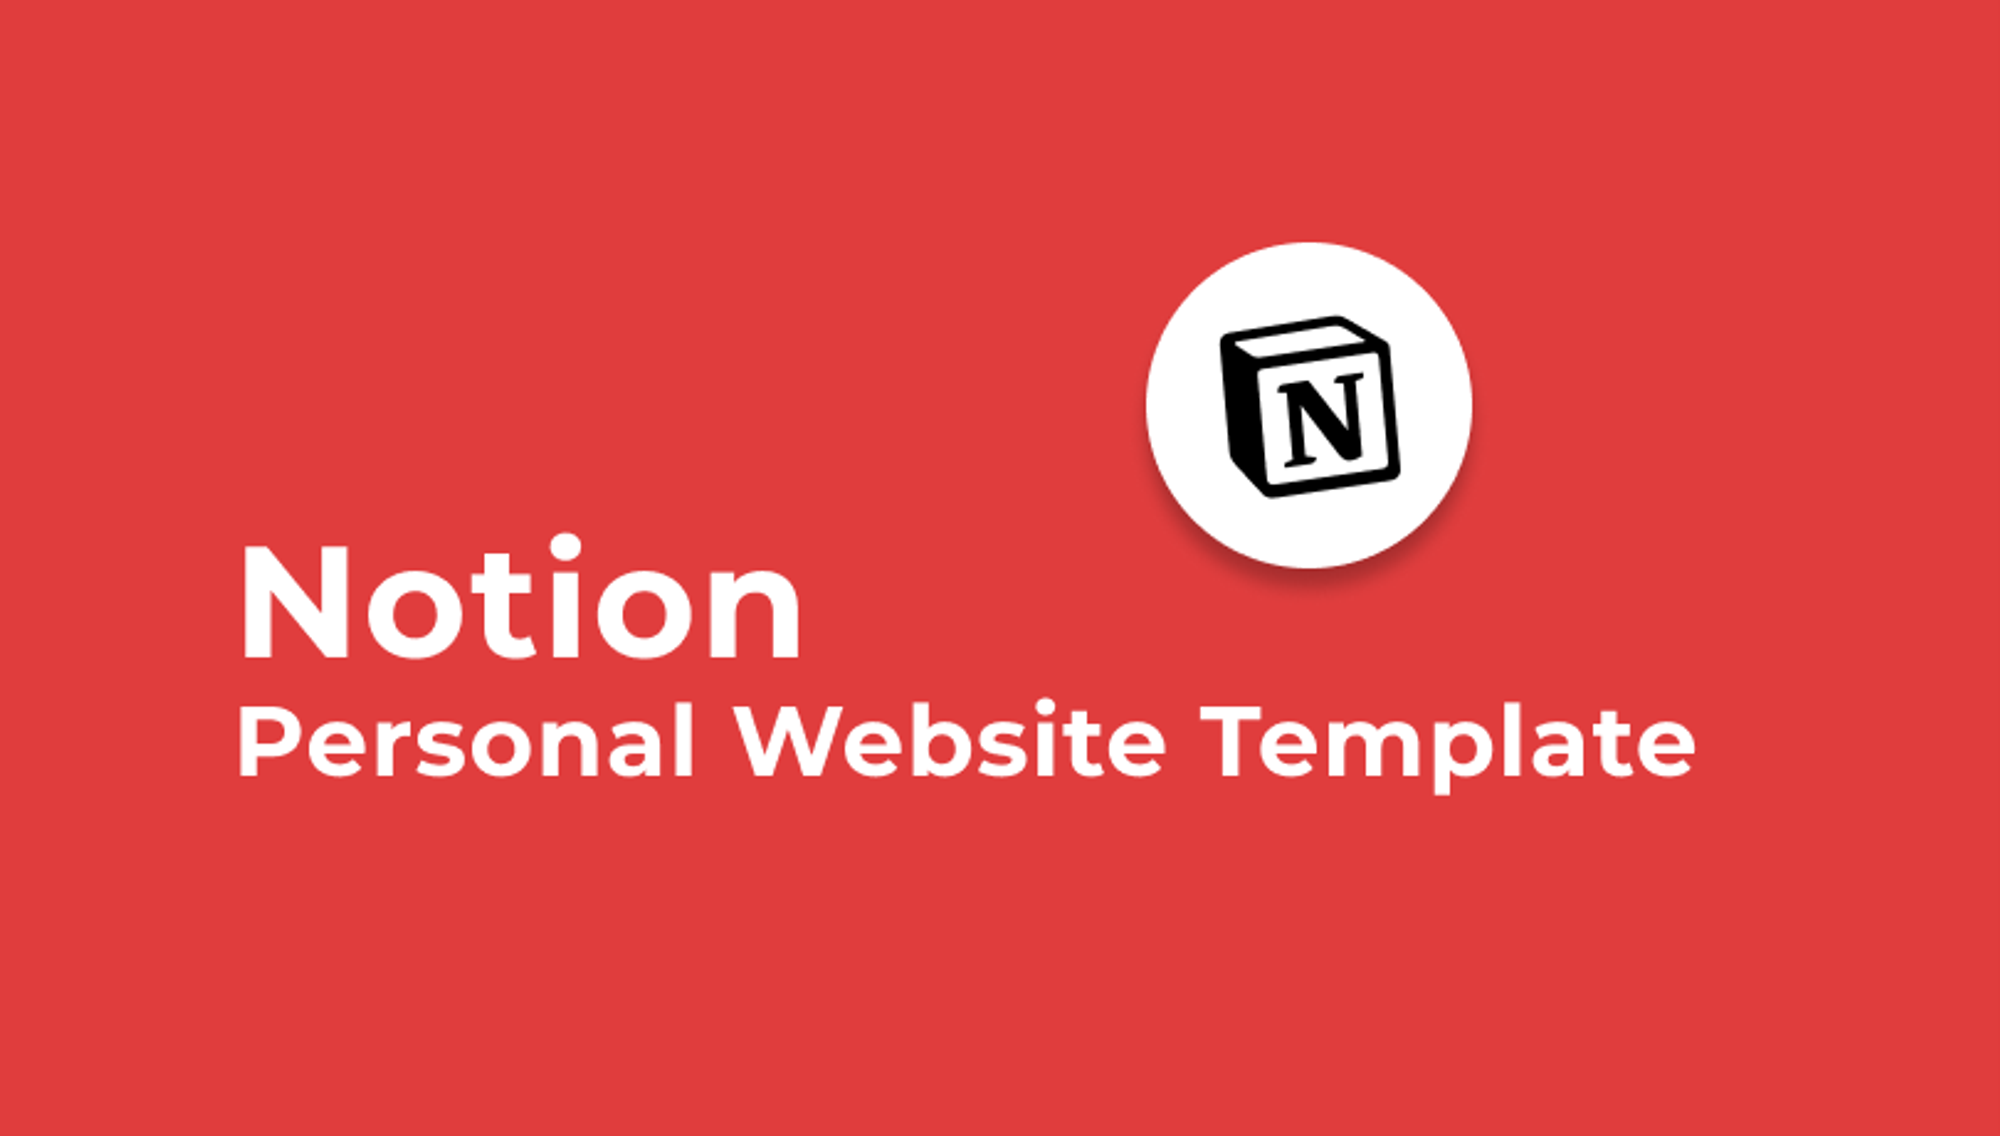 Notion - Personal Website Template